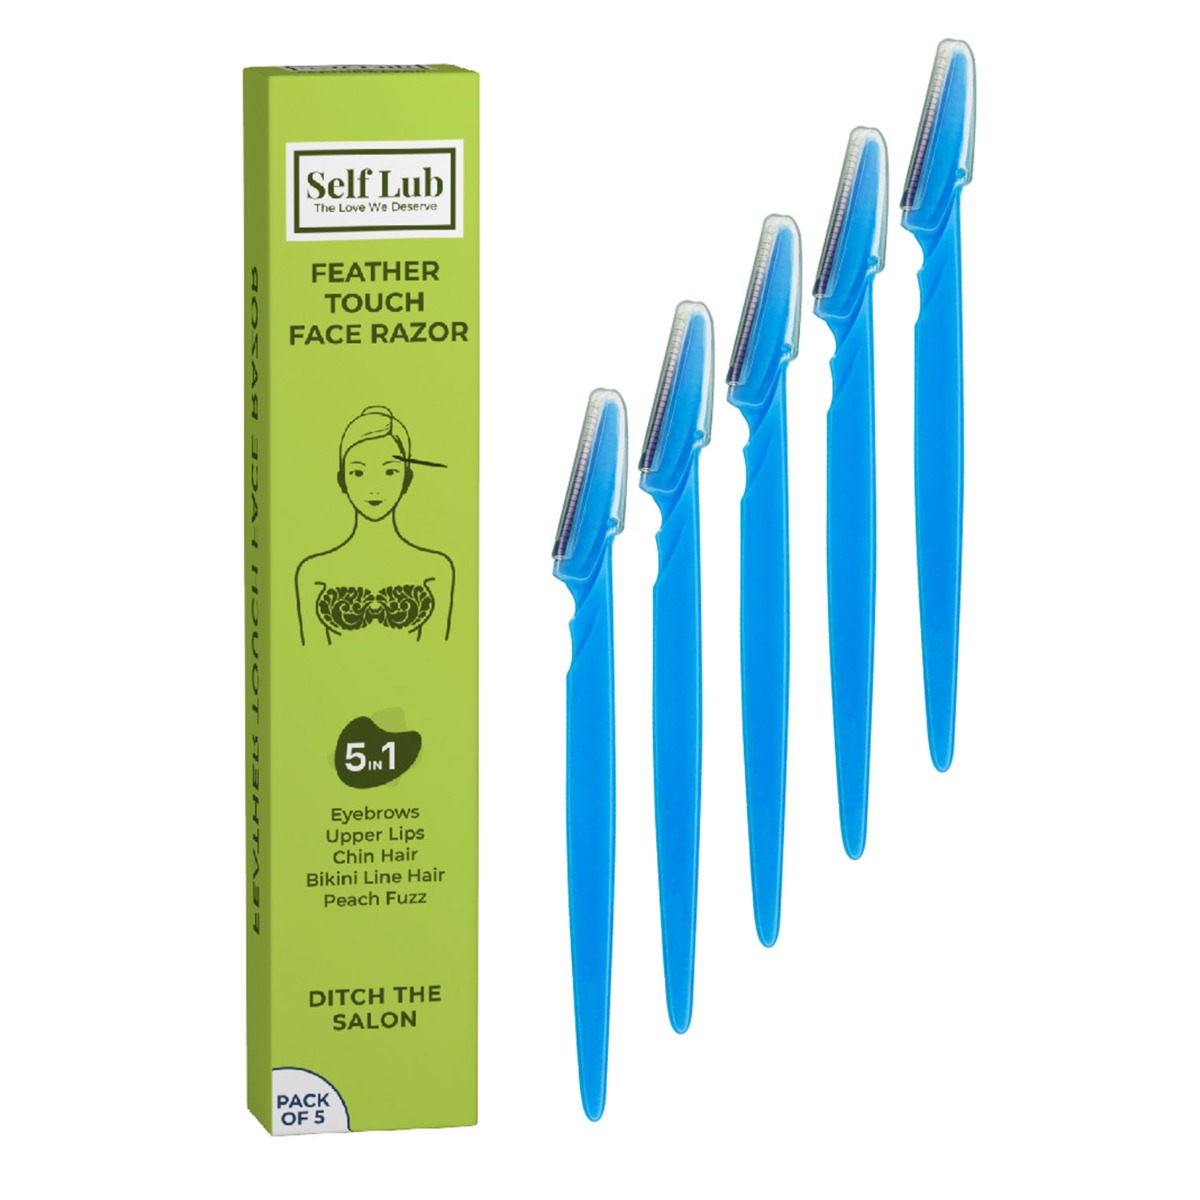 Self Lub Feather Touch Face Razor for Pain Free Hair Removal for Face & Eyebrow - Blue, 5 Razors